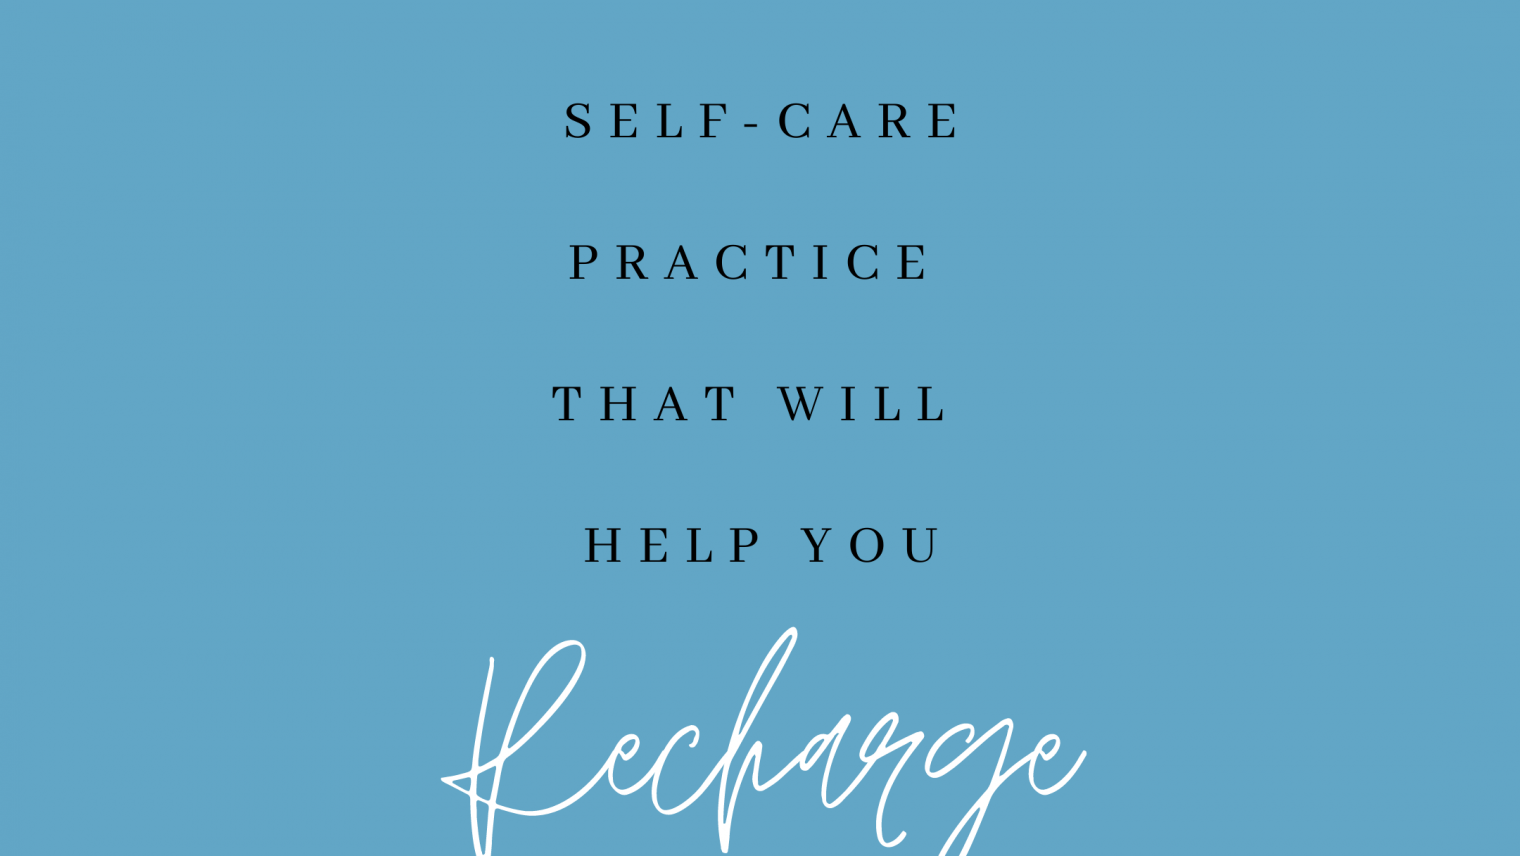 Recharge with a Self-care Practice